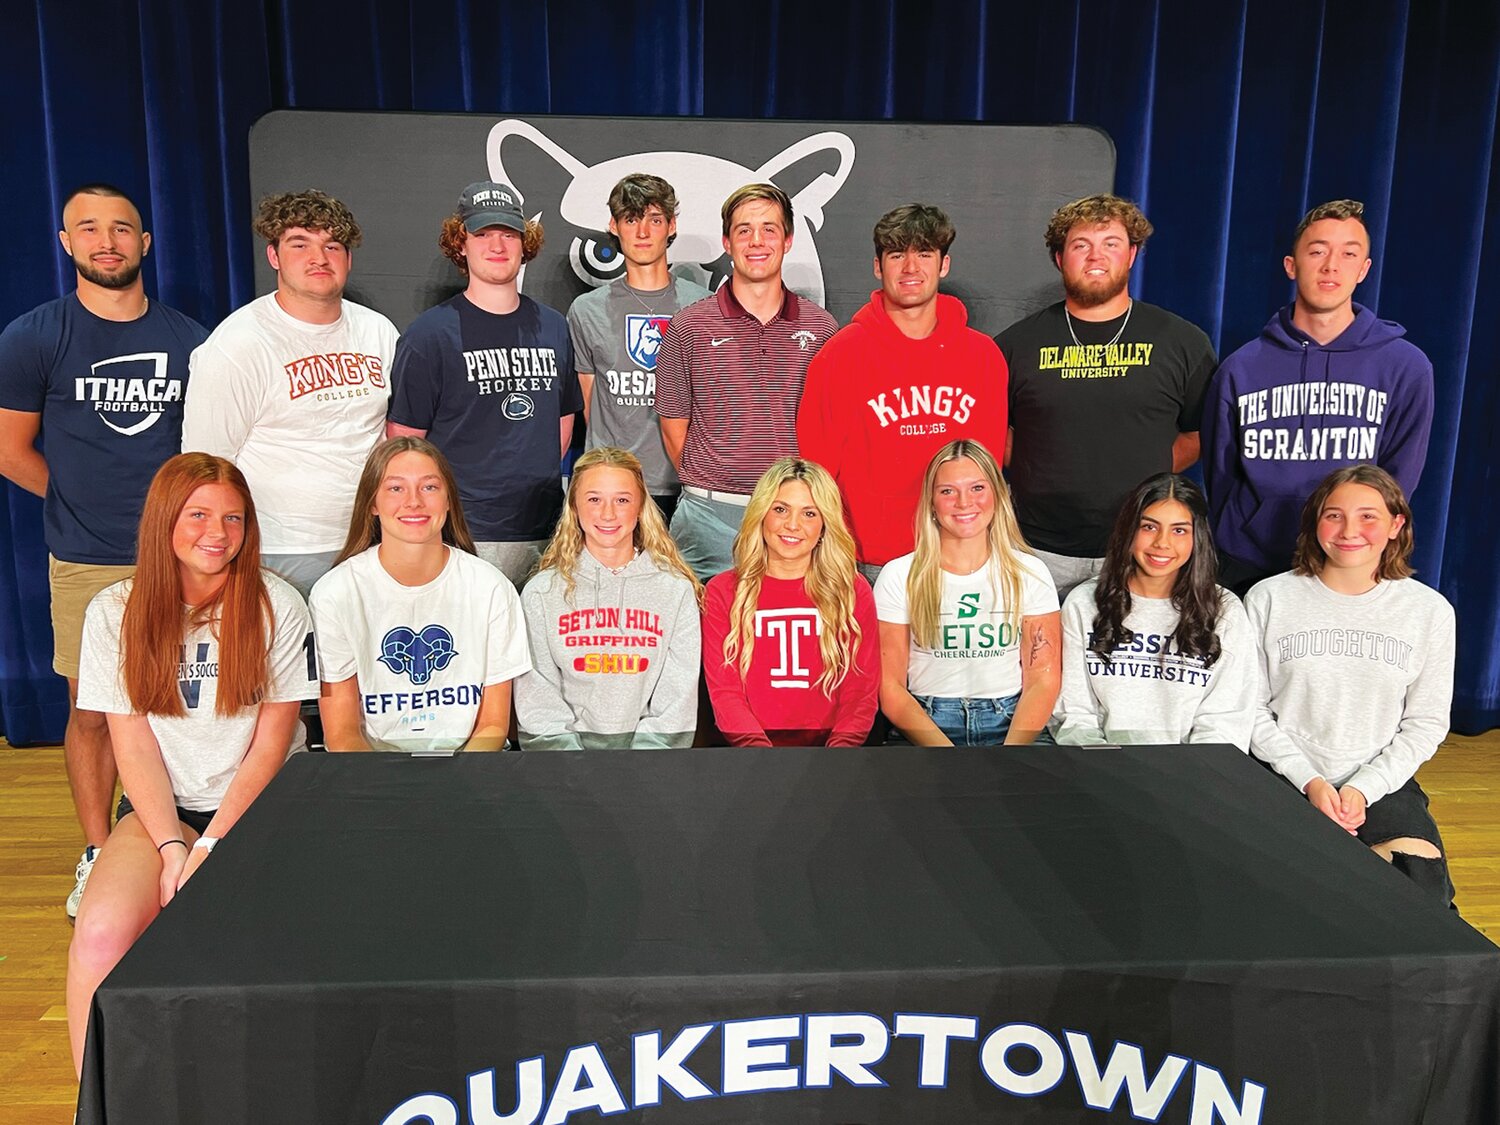 Quakertown seniors were recognized on May 23 for their commitment to compete in collegiate sports.  From left are: front row, Maddie Kalinowski, Carolyn Sipprell, Mya Hibsman, Olivia Litvinchuk, Sydney Bishop, Kayra DeVries, Risa Palmer-Kusiak; back row, John Eatherton, Nick Laudenberger, Connor Ellmore, Chris Parrillo, Tyler Wilkin, Michael Richino, Vinny Pellegrini and William Dickson.